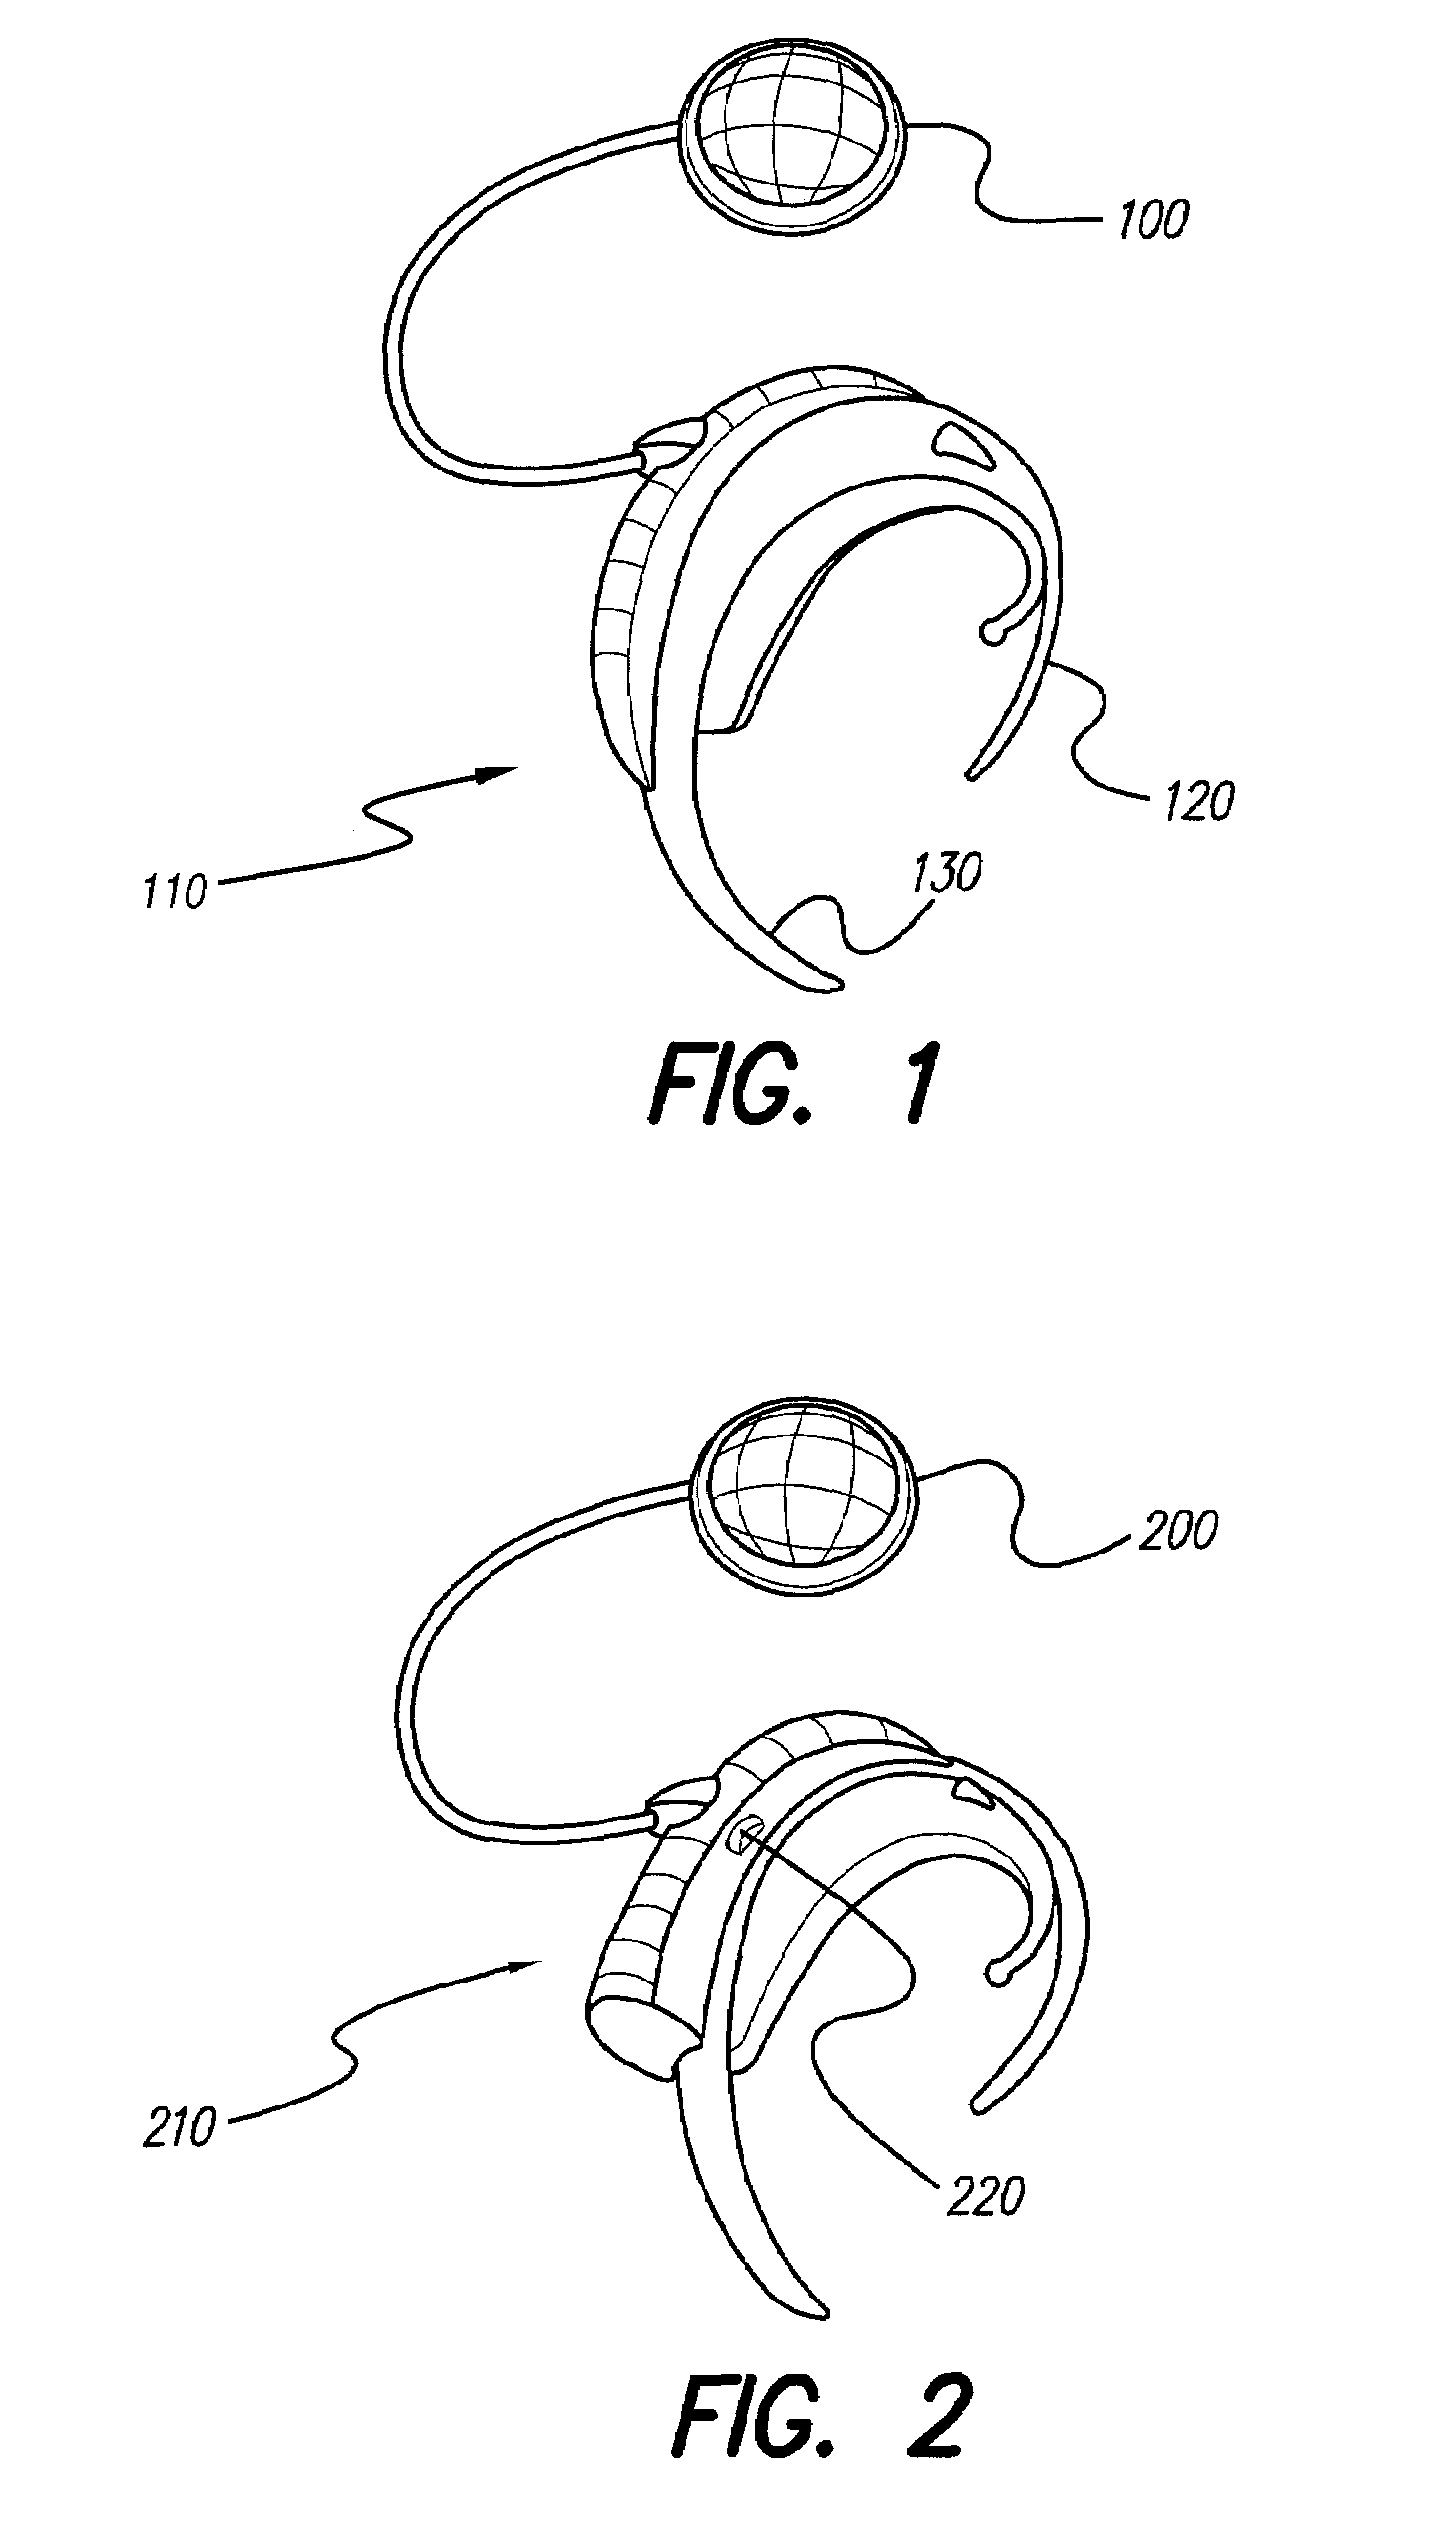 Shell for external components of hearing aid systems